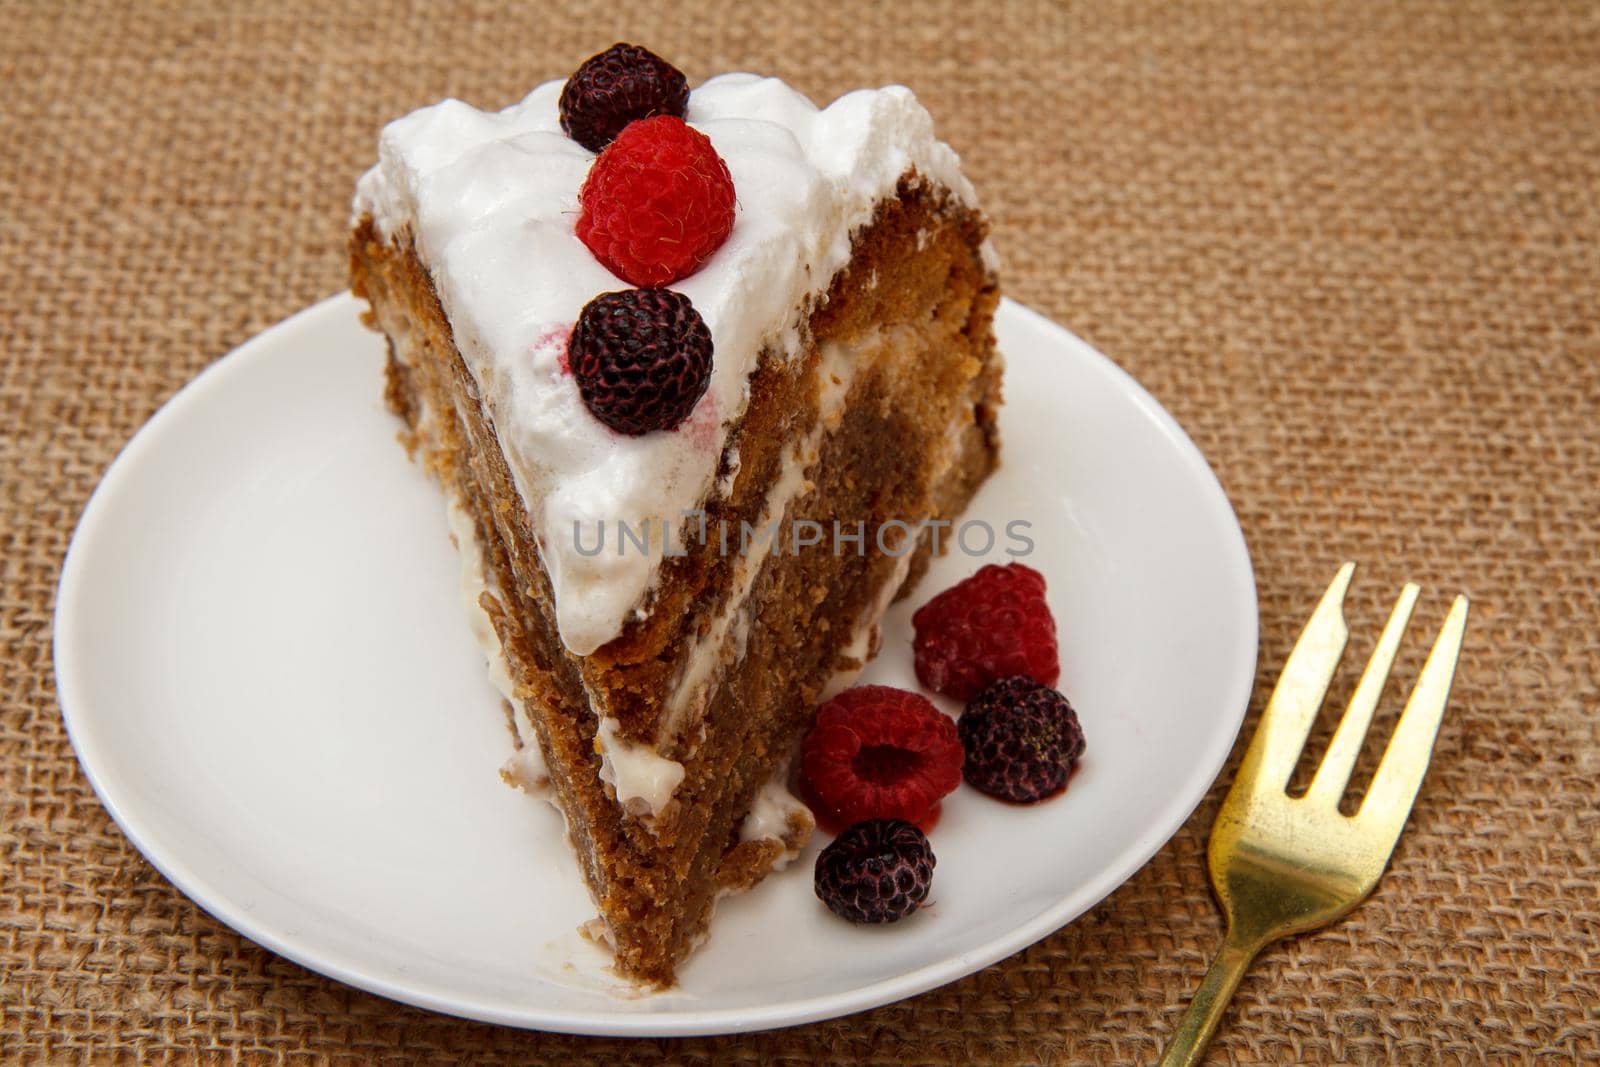 Slice of homemade biscuit cake decorated with whipped cream and raspberries on table with sackcloth